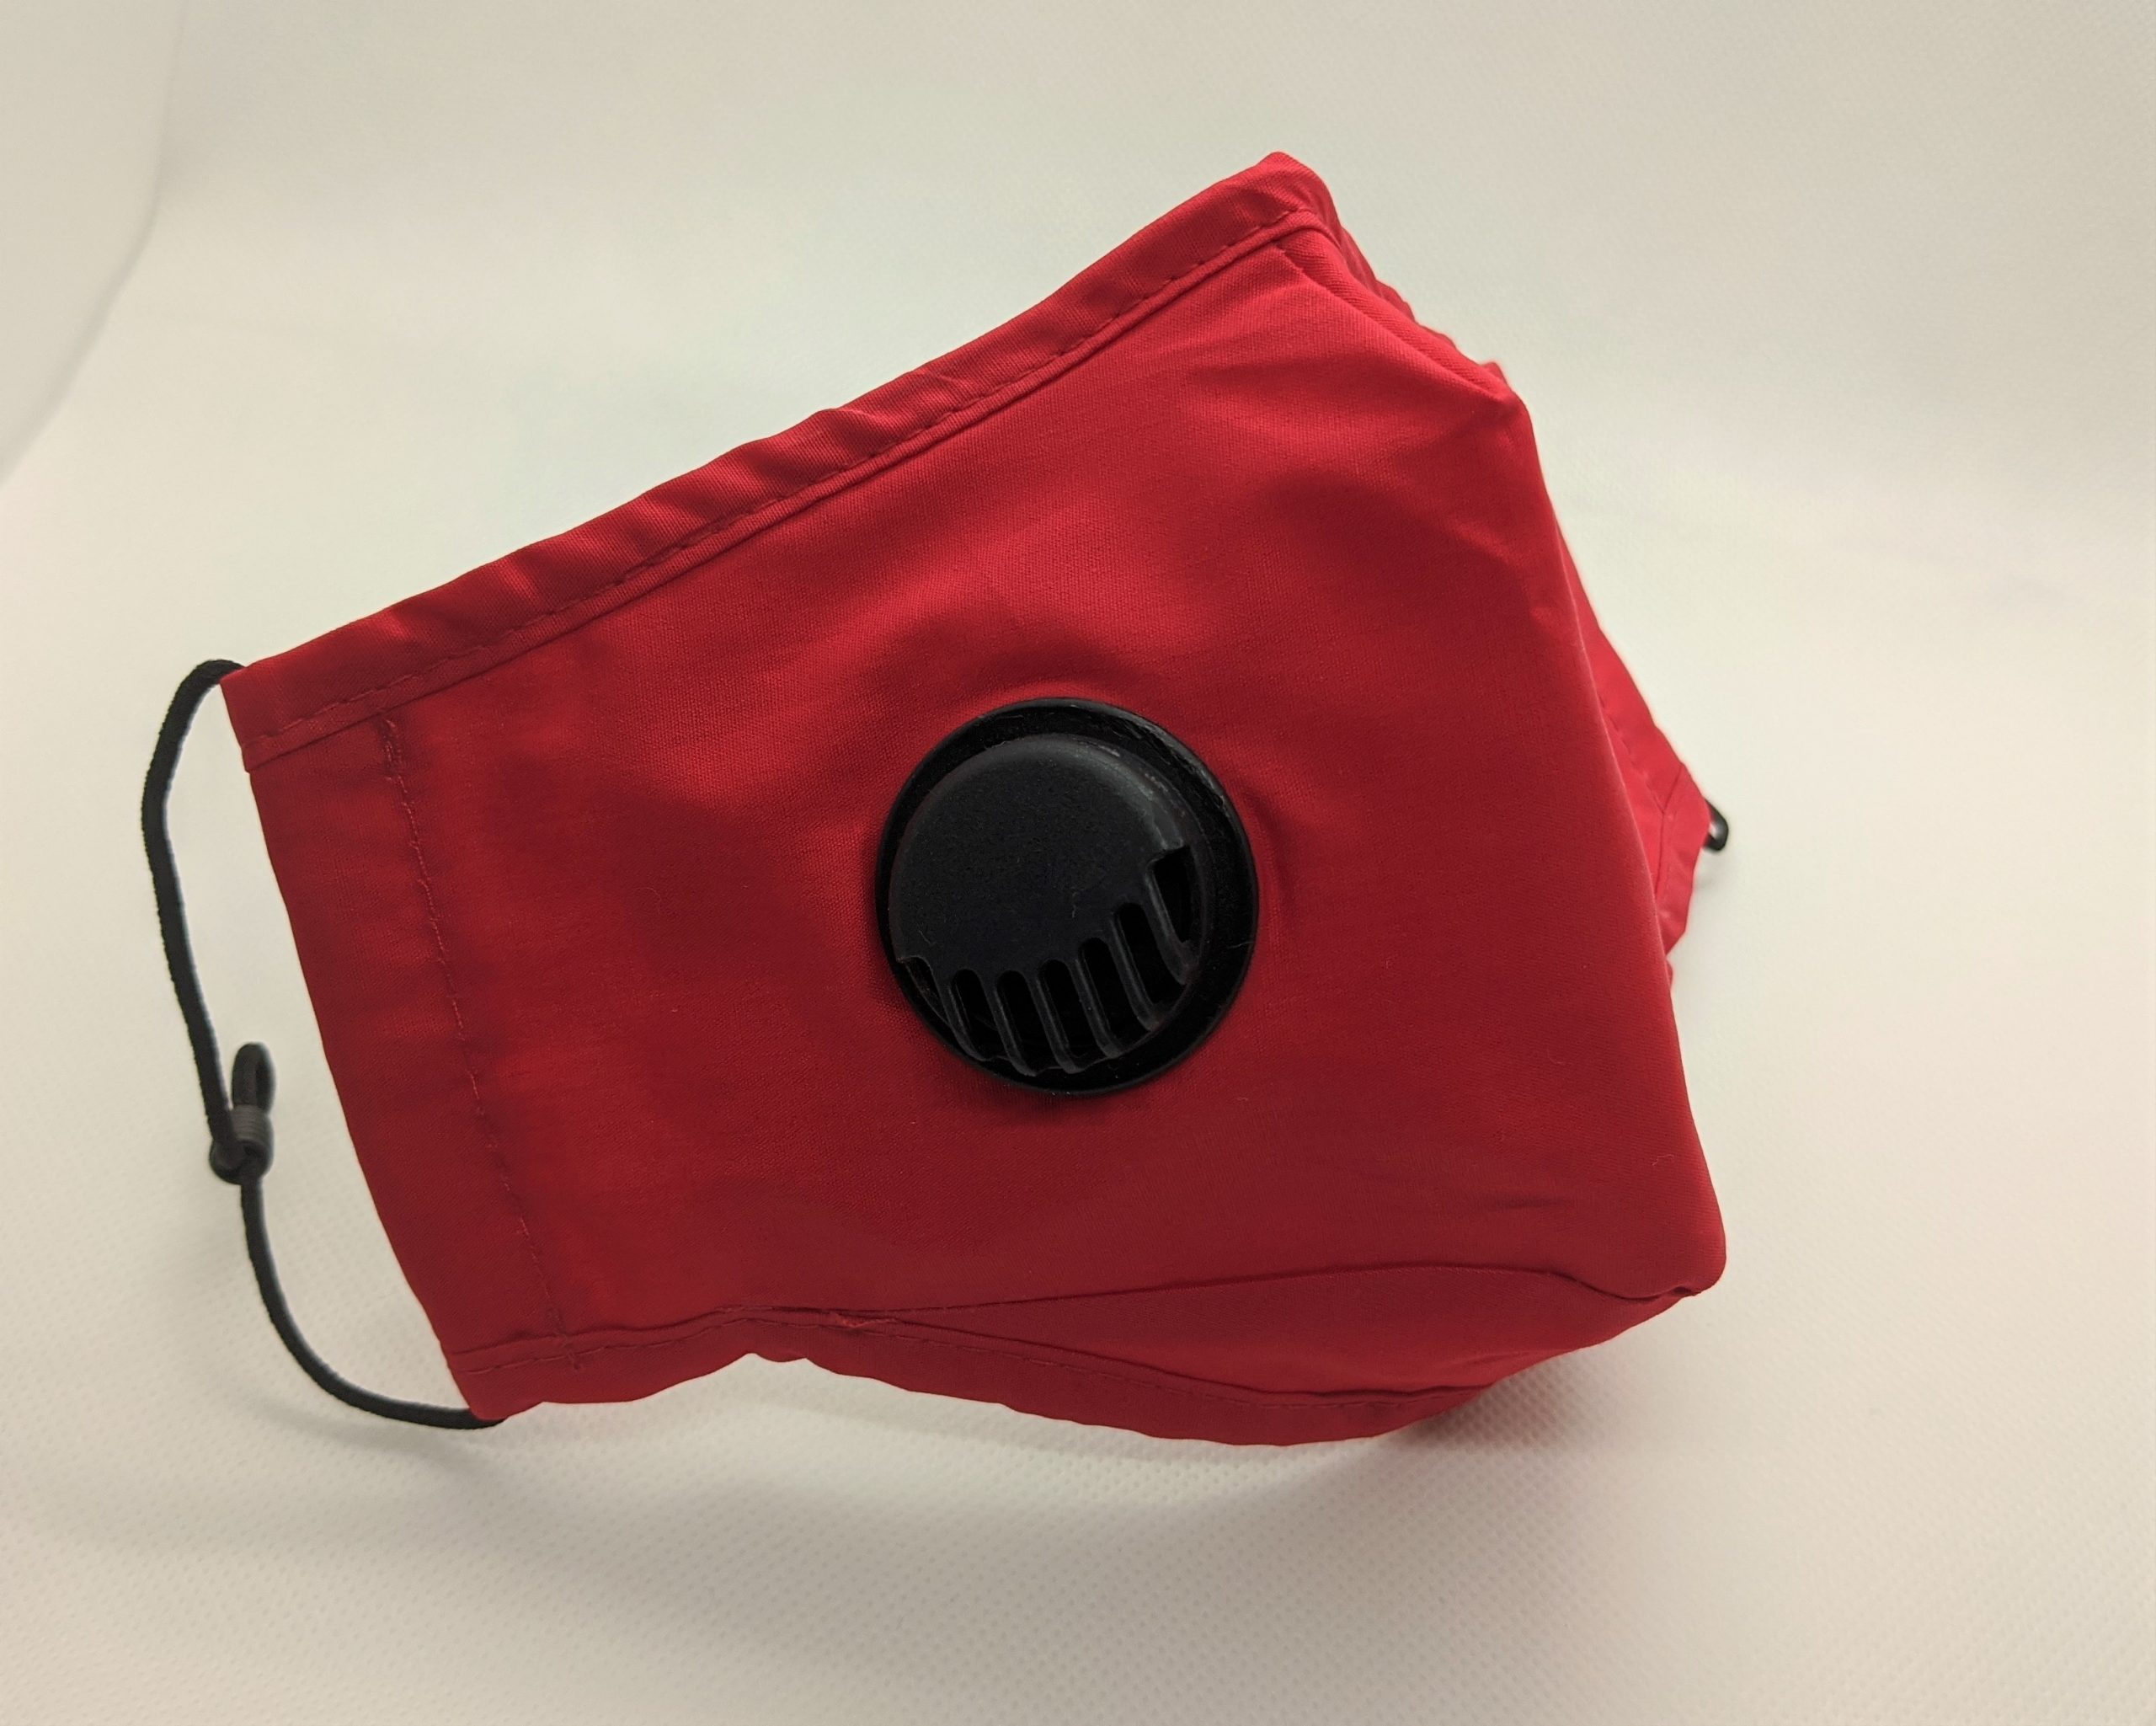 Red mask with black vent